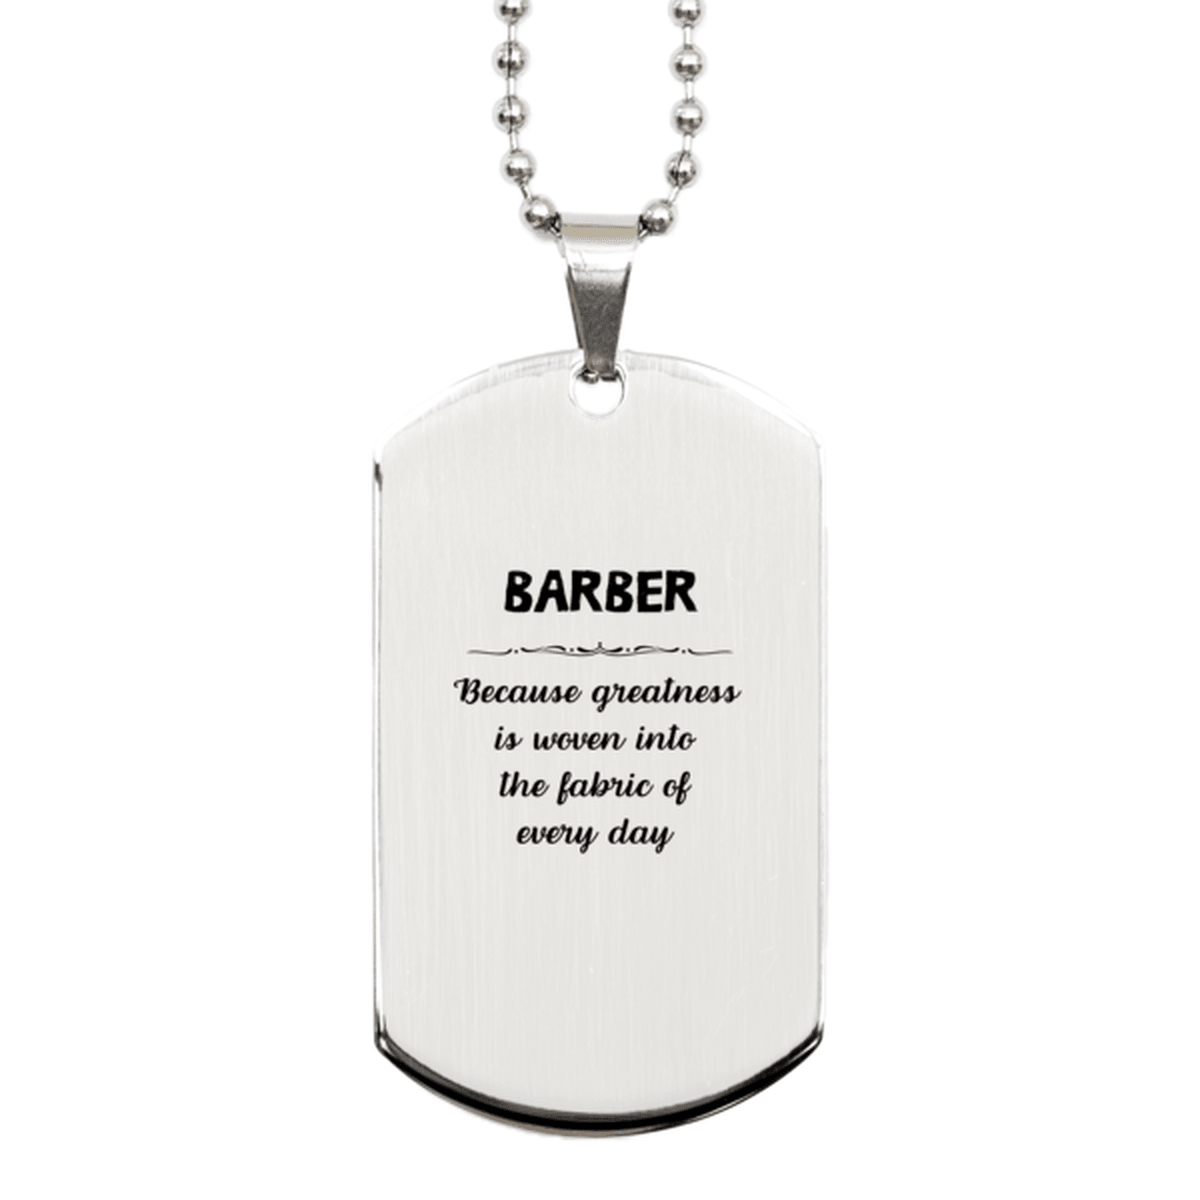 Sarcastic Barber Silver Dog Tag Gifts, Christmas Holiday Gifts for Barber Birthday, Barber: Because greatness is woven into the fabric of every day, Coworkers, Friends - Mallard Moon Gift Shop